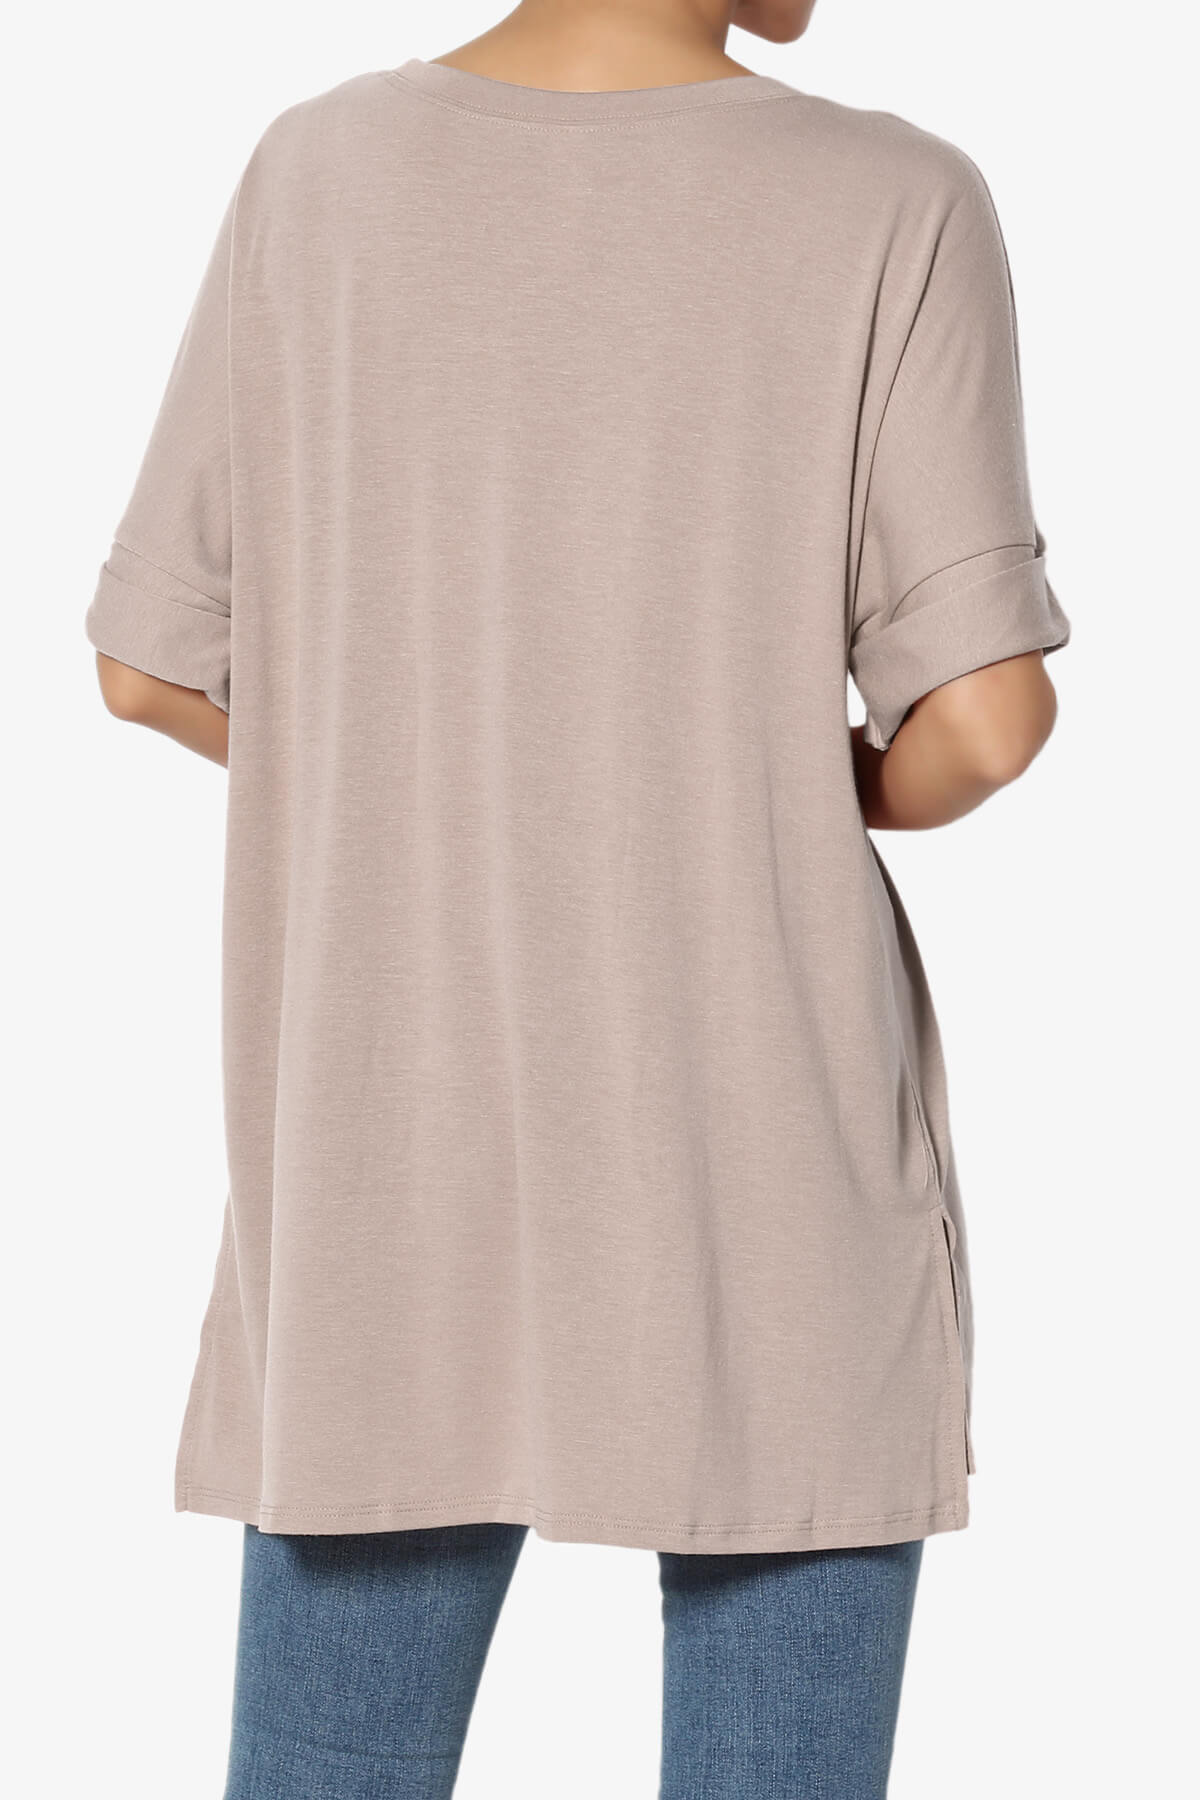 Load image into Gallery viewer, Onella Round Neck Rolled Short Sleeve Top LIGHT MOCHA_2
